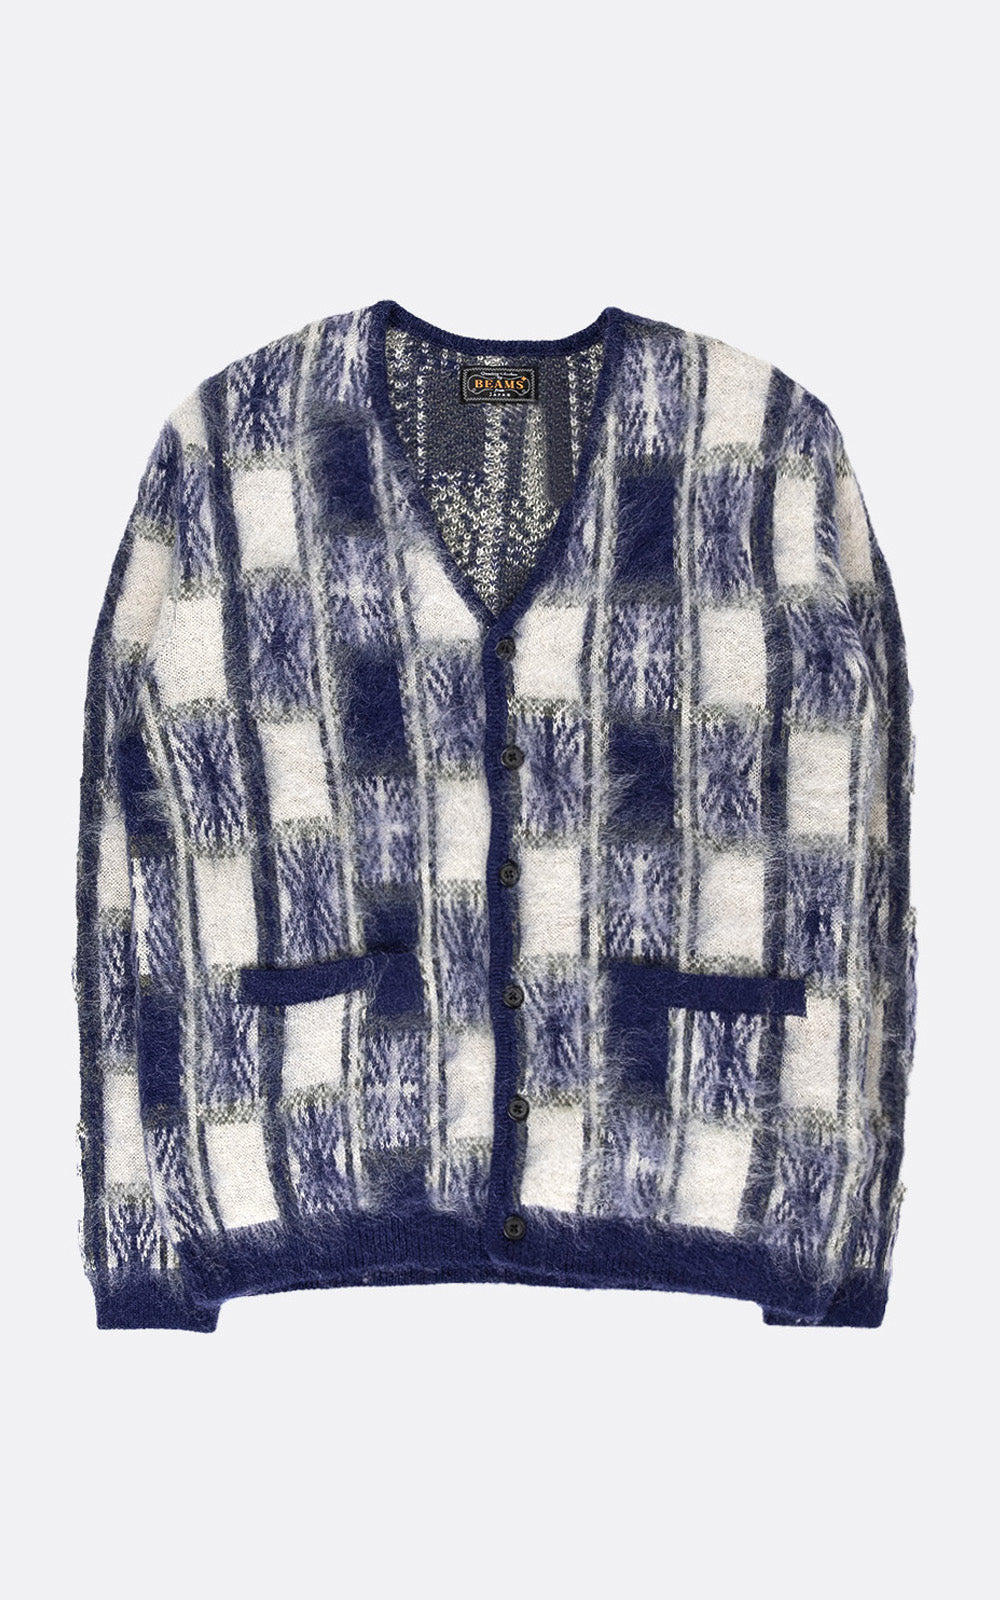 CARDIGAN DOUBLE JACQUARD CHECK PATTERN MOHAIR NAVY